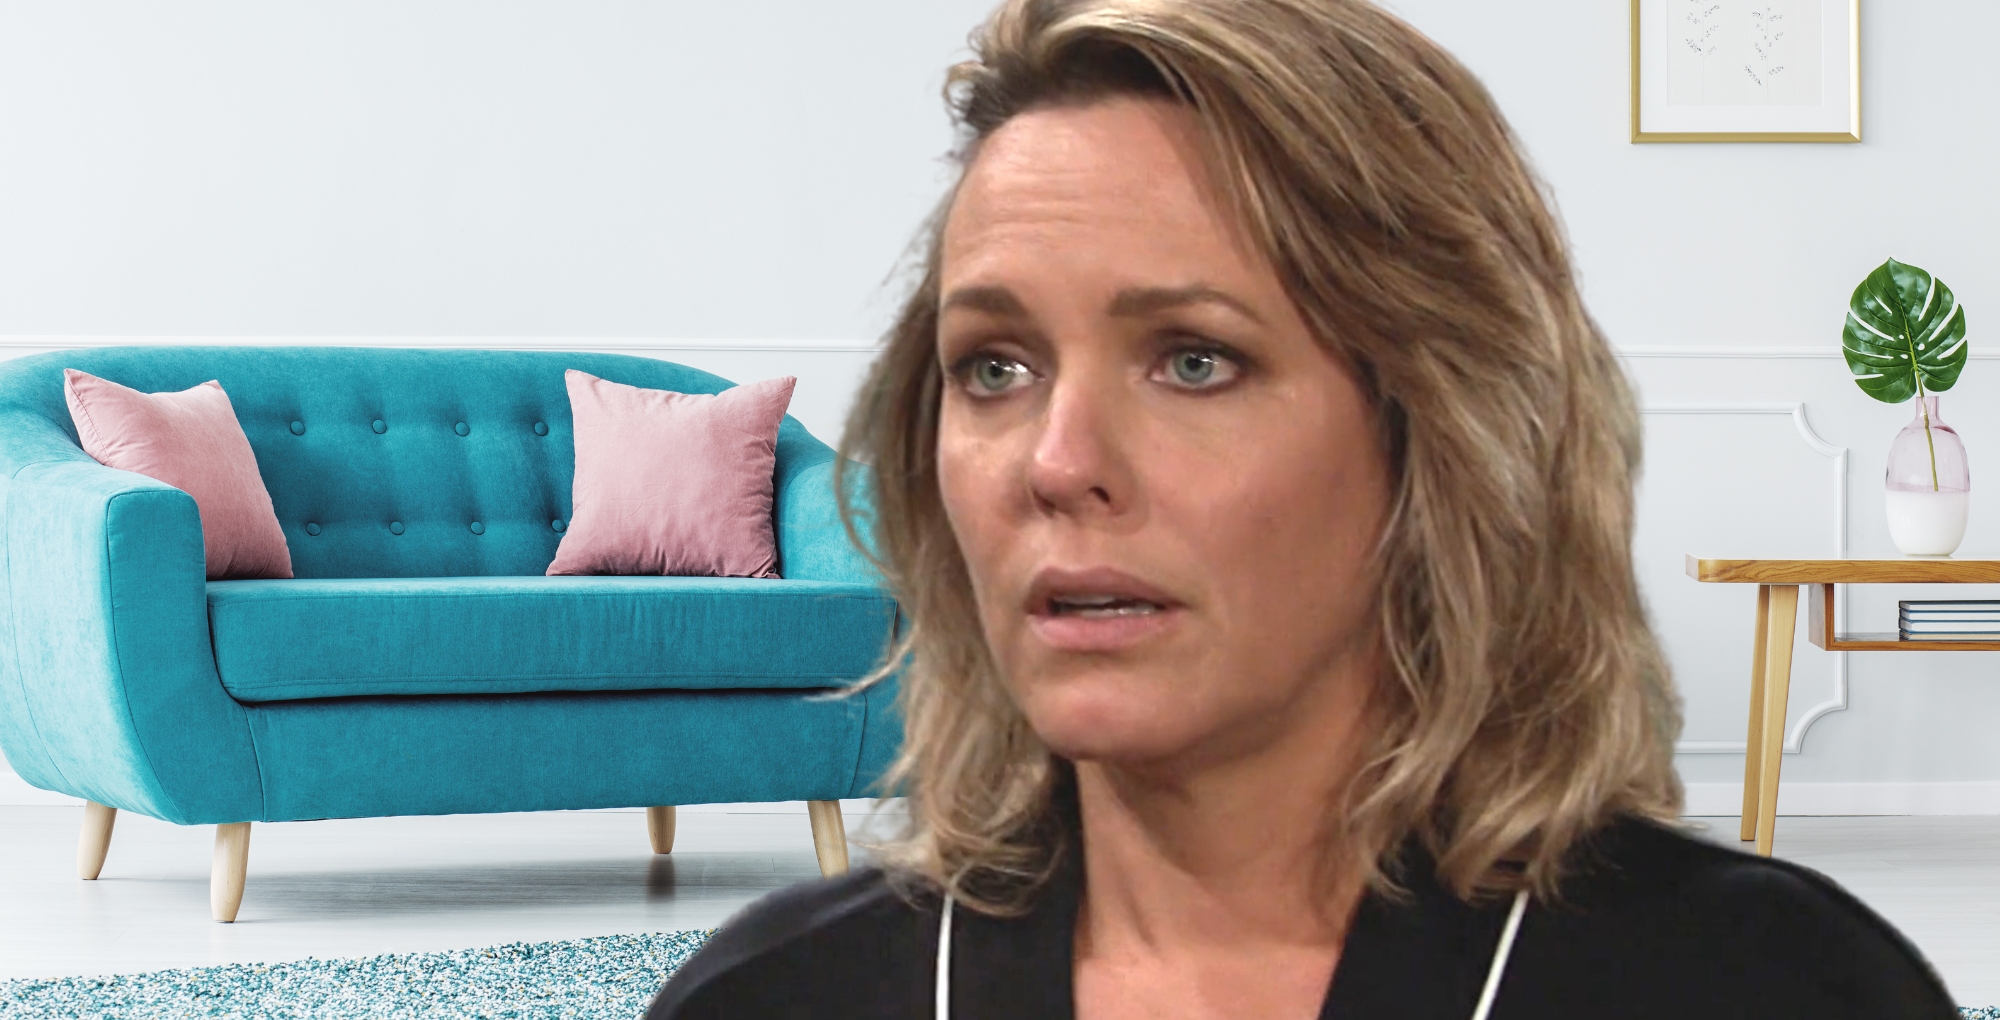 nicole walker of days of our lives gets her turn on the soap hub couch.